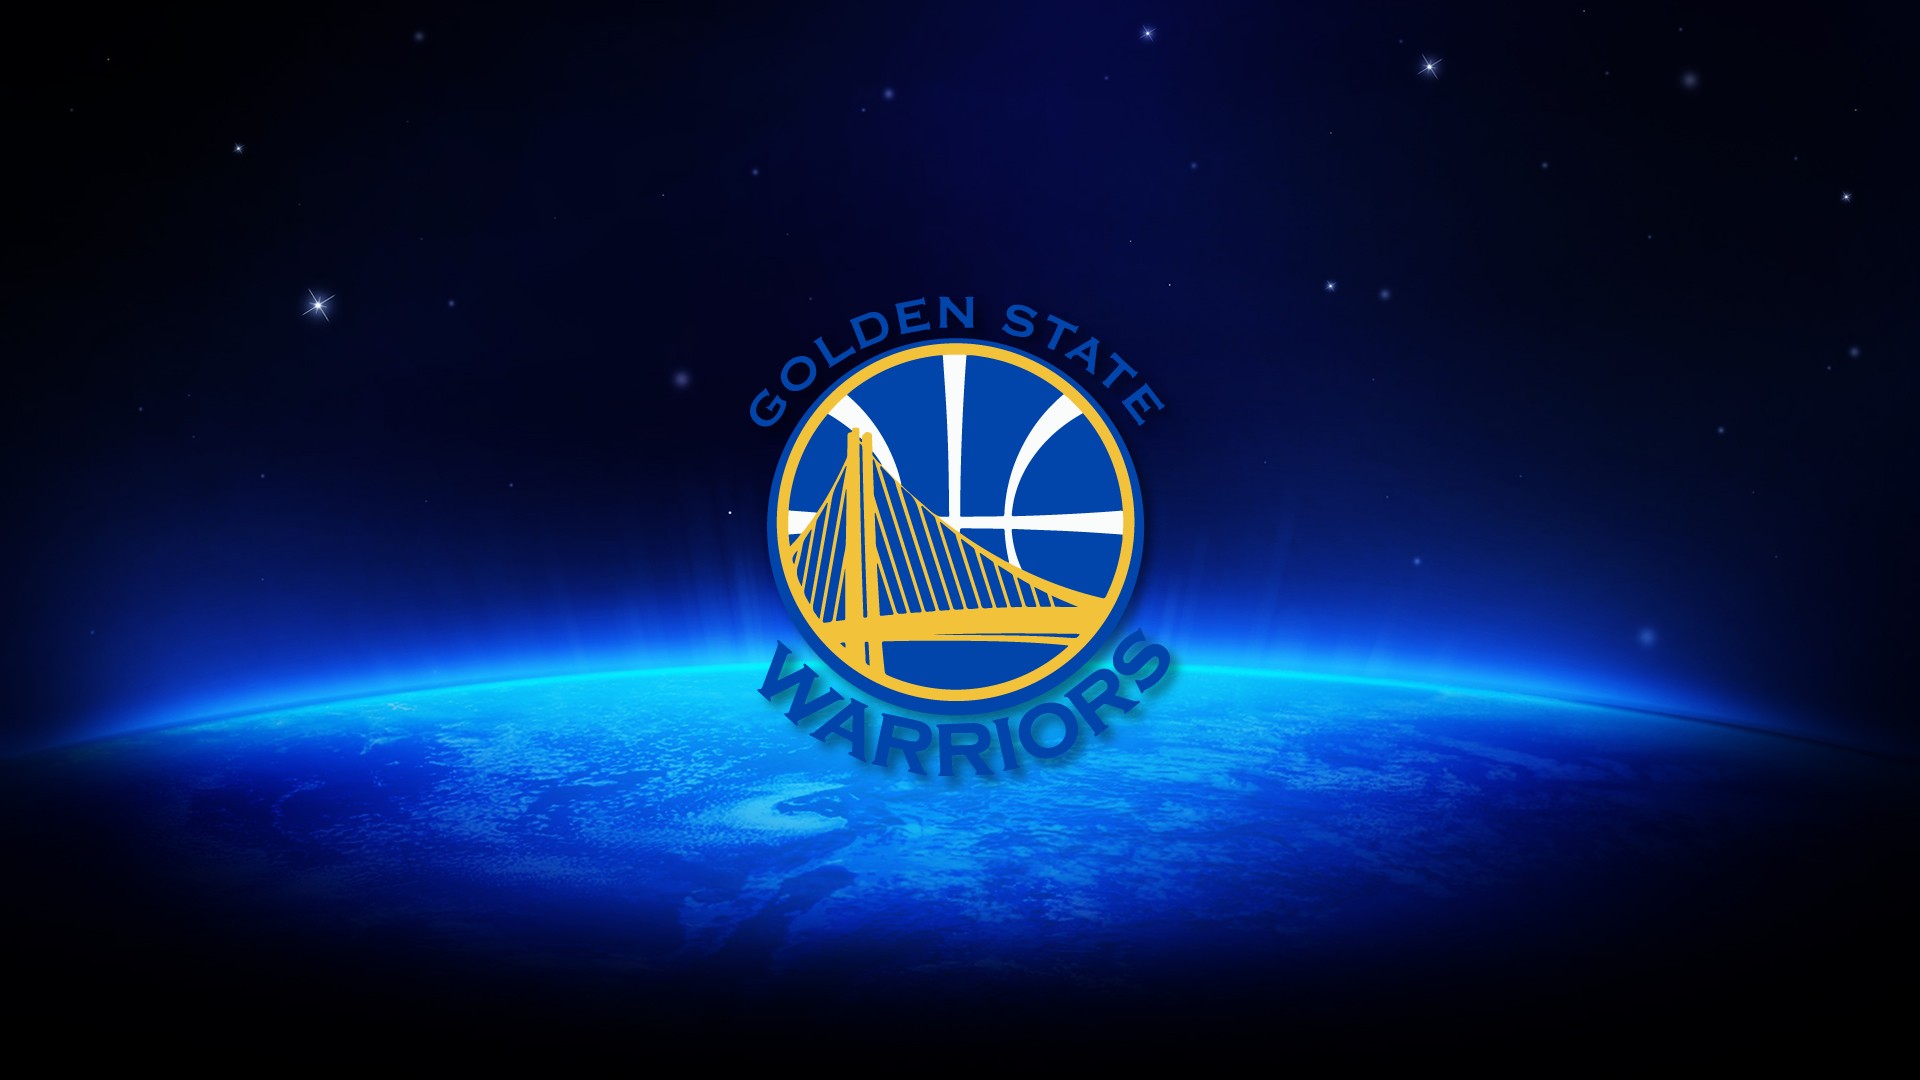 Golden State Basketball For Desktop Wallpaper with high-resolution 1920x1080 pixel. You can use this wallpaper for your Desktop Computer Backgrounds, Windows or Mac Screensavers, iPhone Lock screen, Tablet or Android and another Mobile Phone device